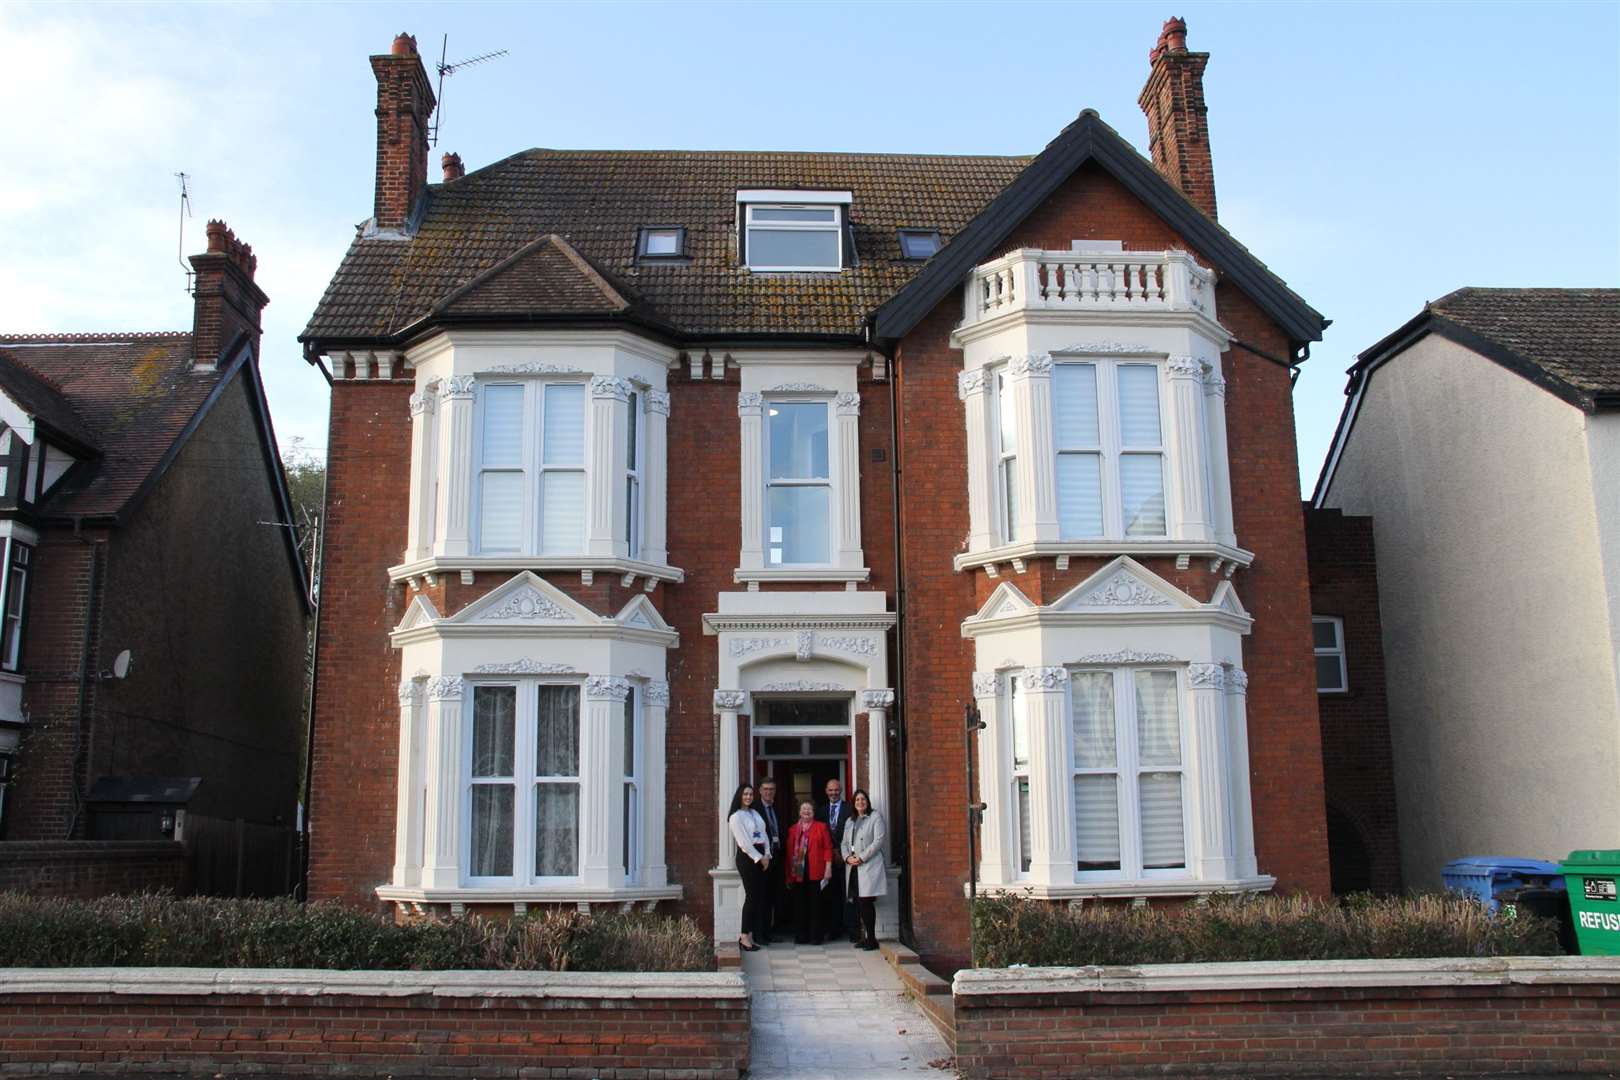 The supported accommodation in Wrotham Road, Gravesend. Photo: Gravesham Borough Council